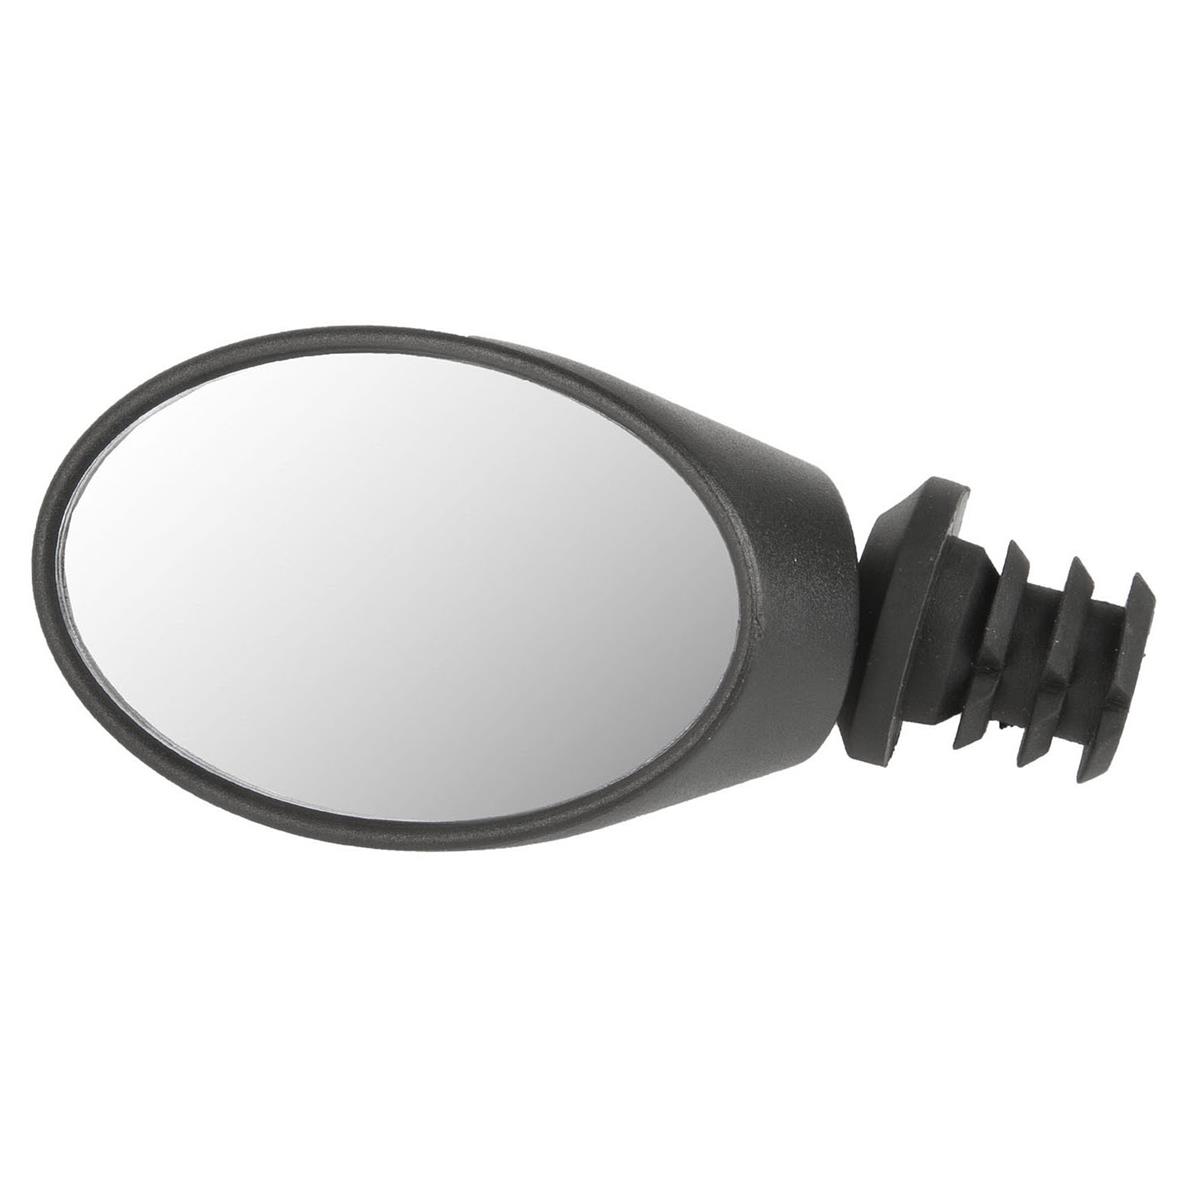 Spy Oval adjustable left / right bicycle mirror